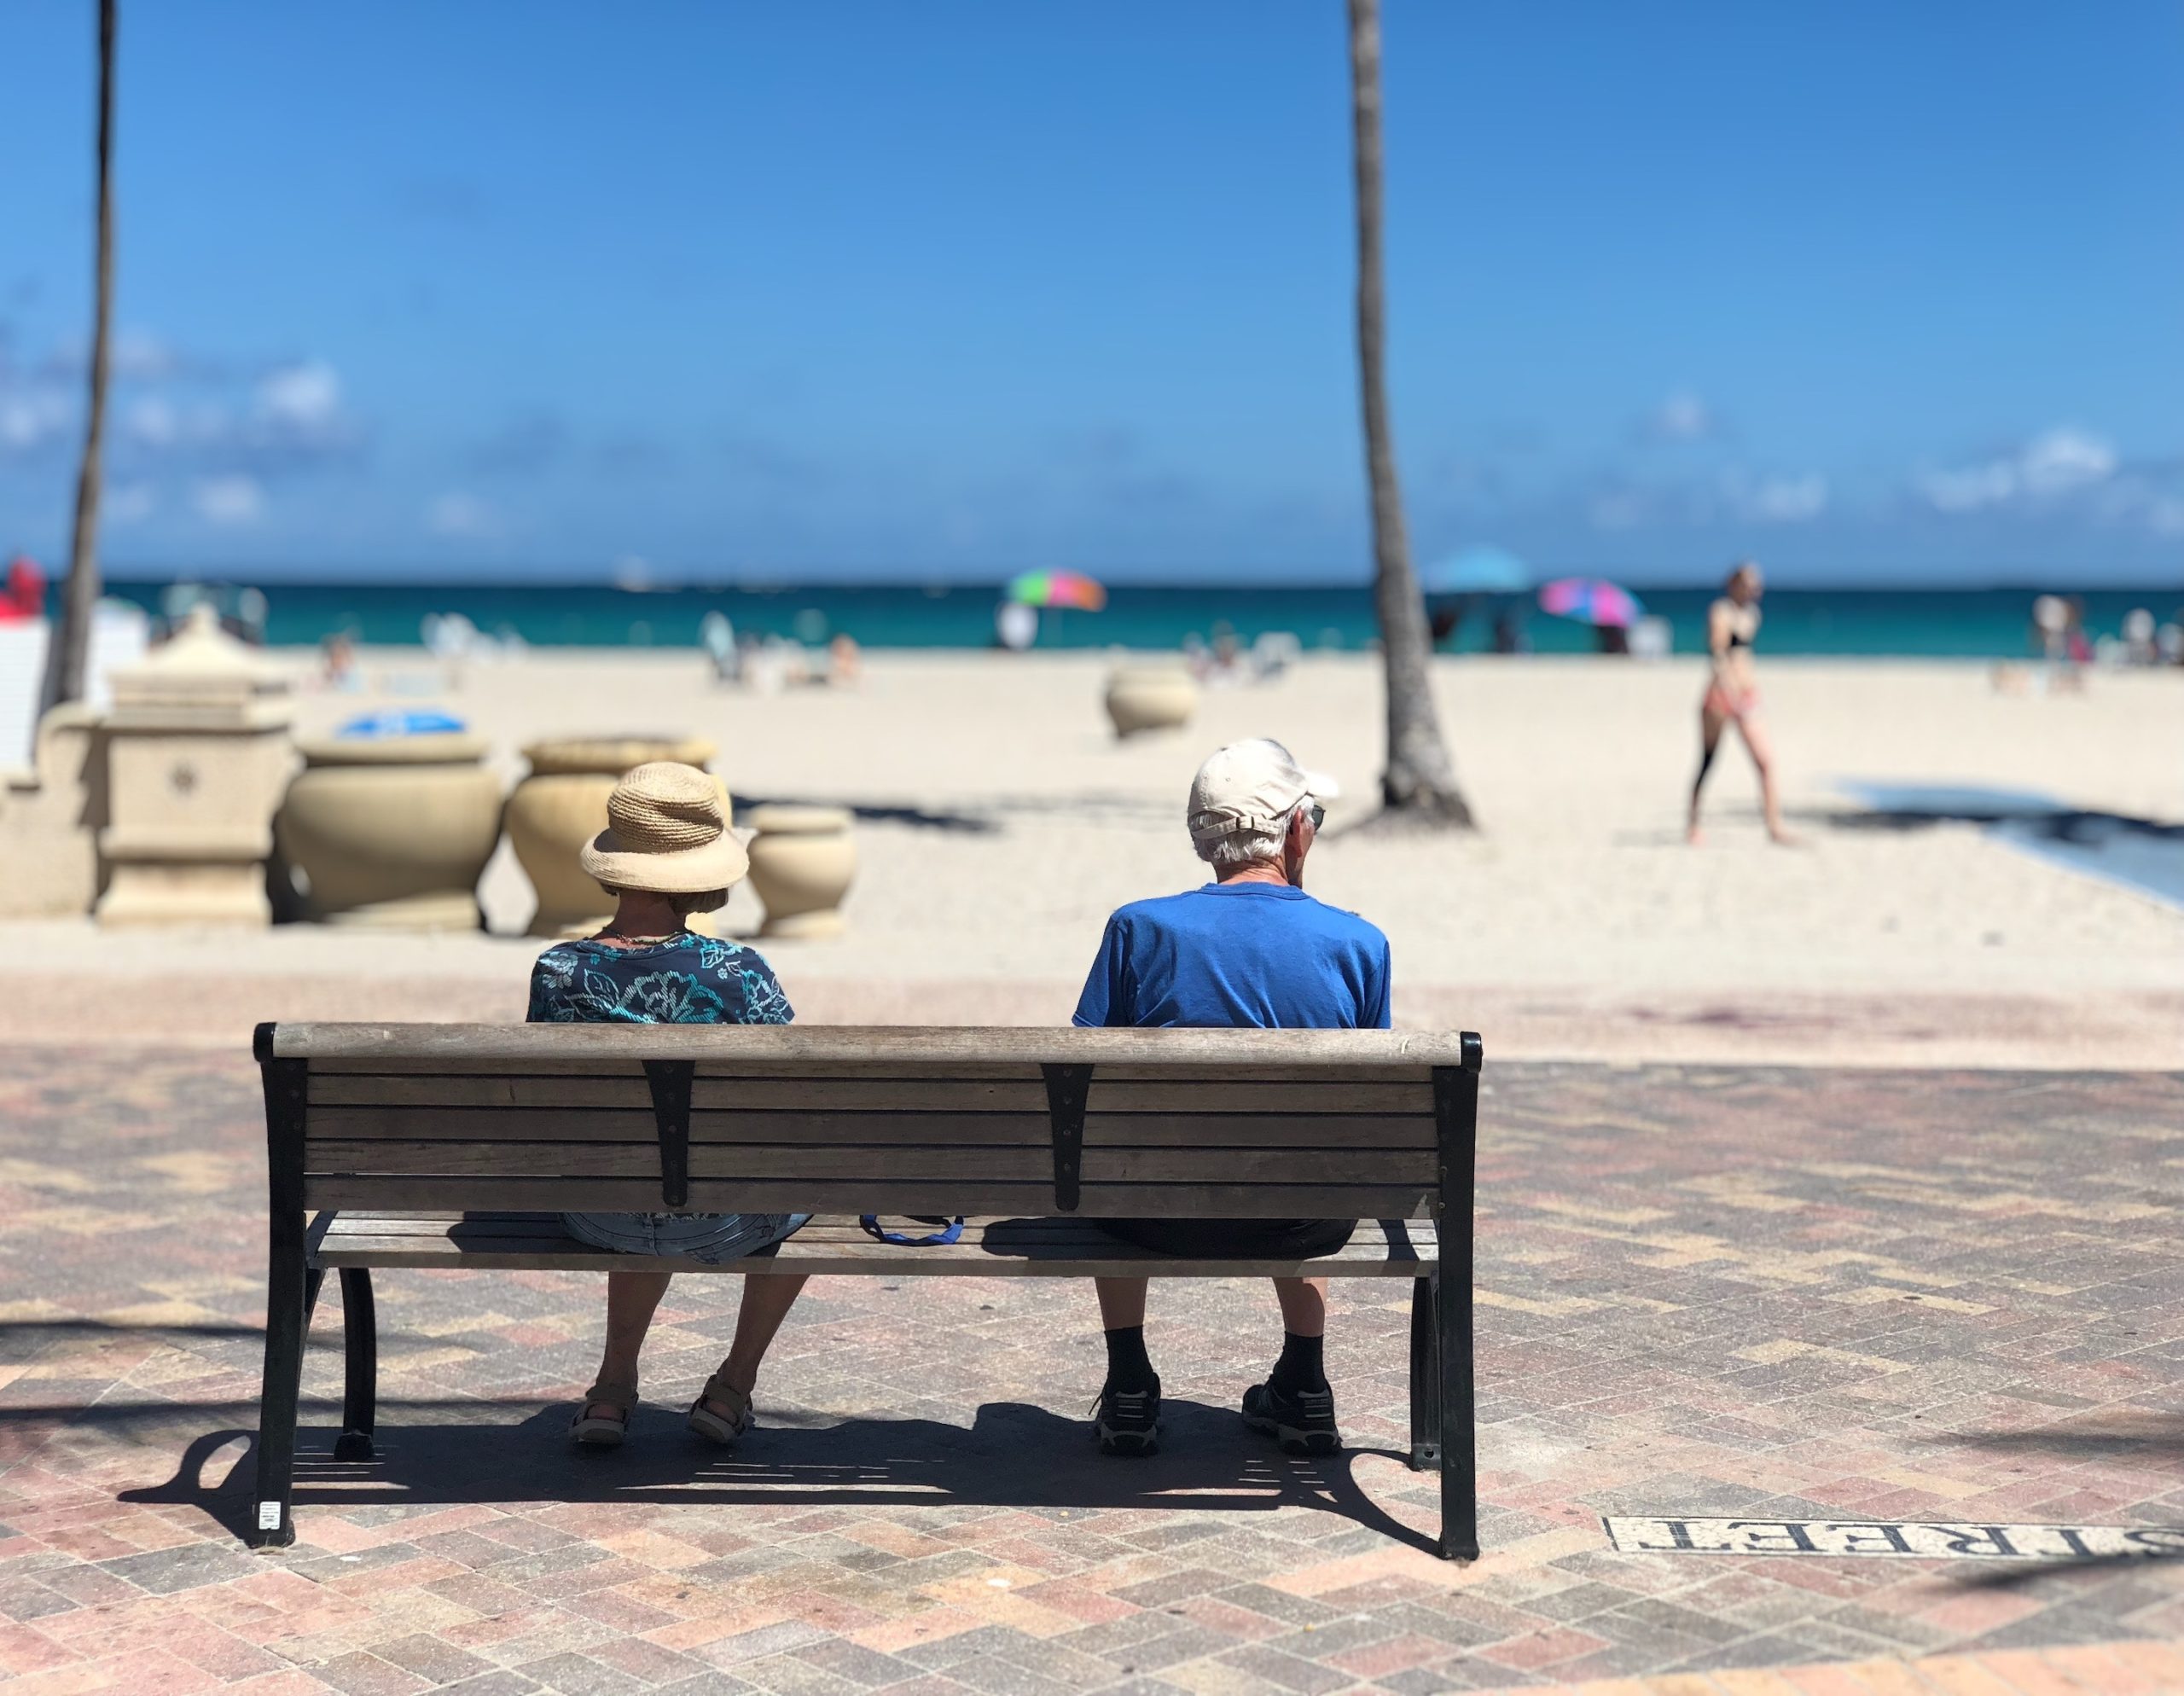 Two older people sitting on a bench looking out at the beach.